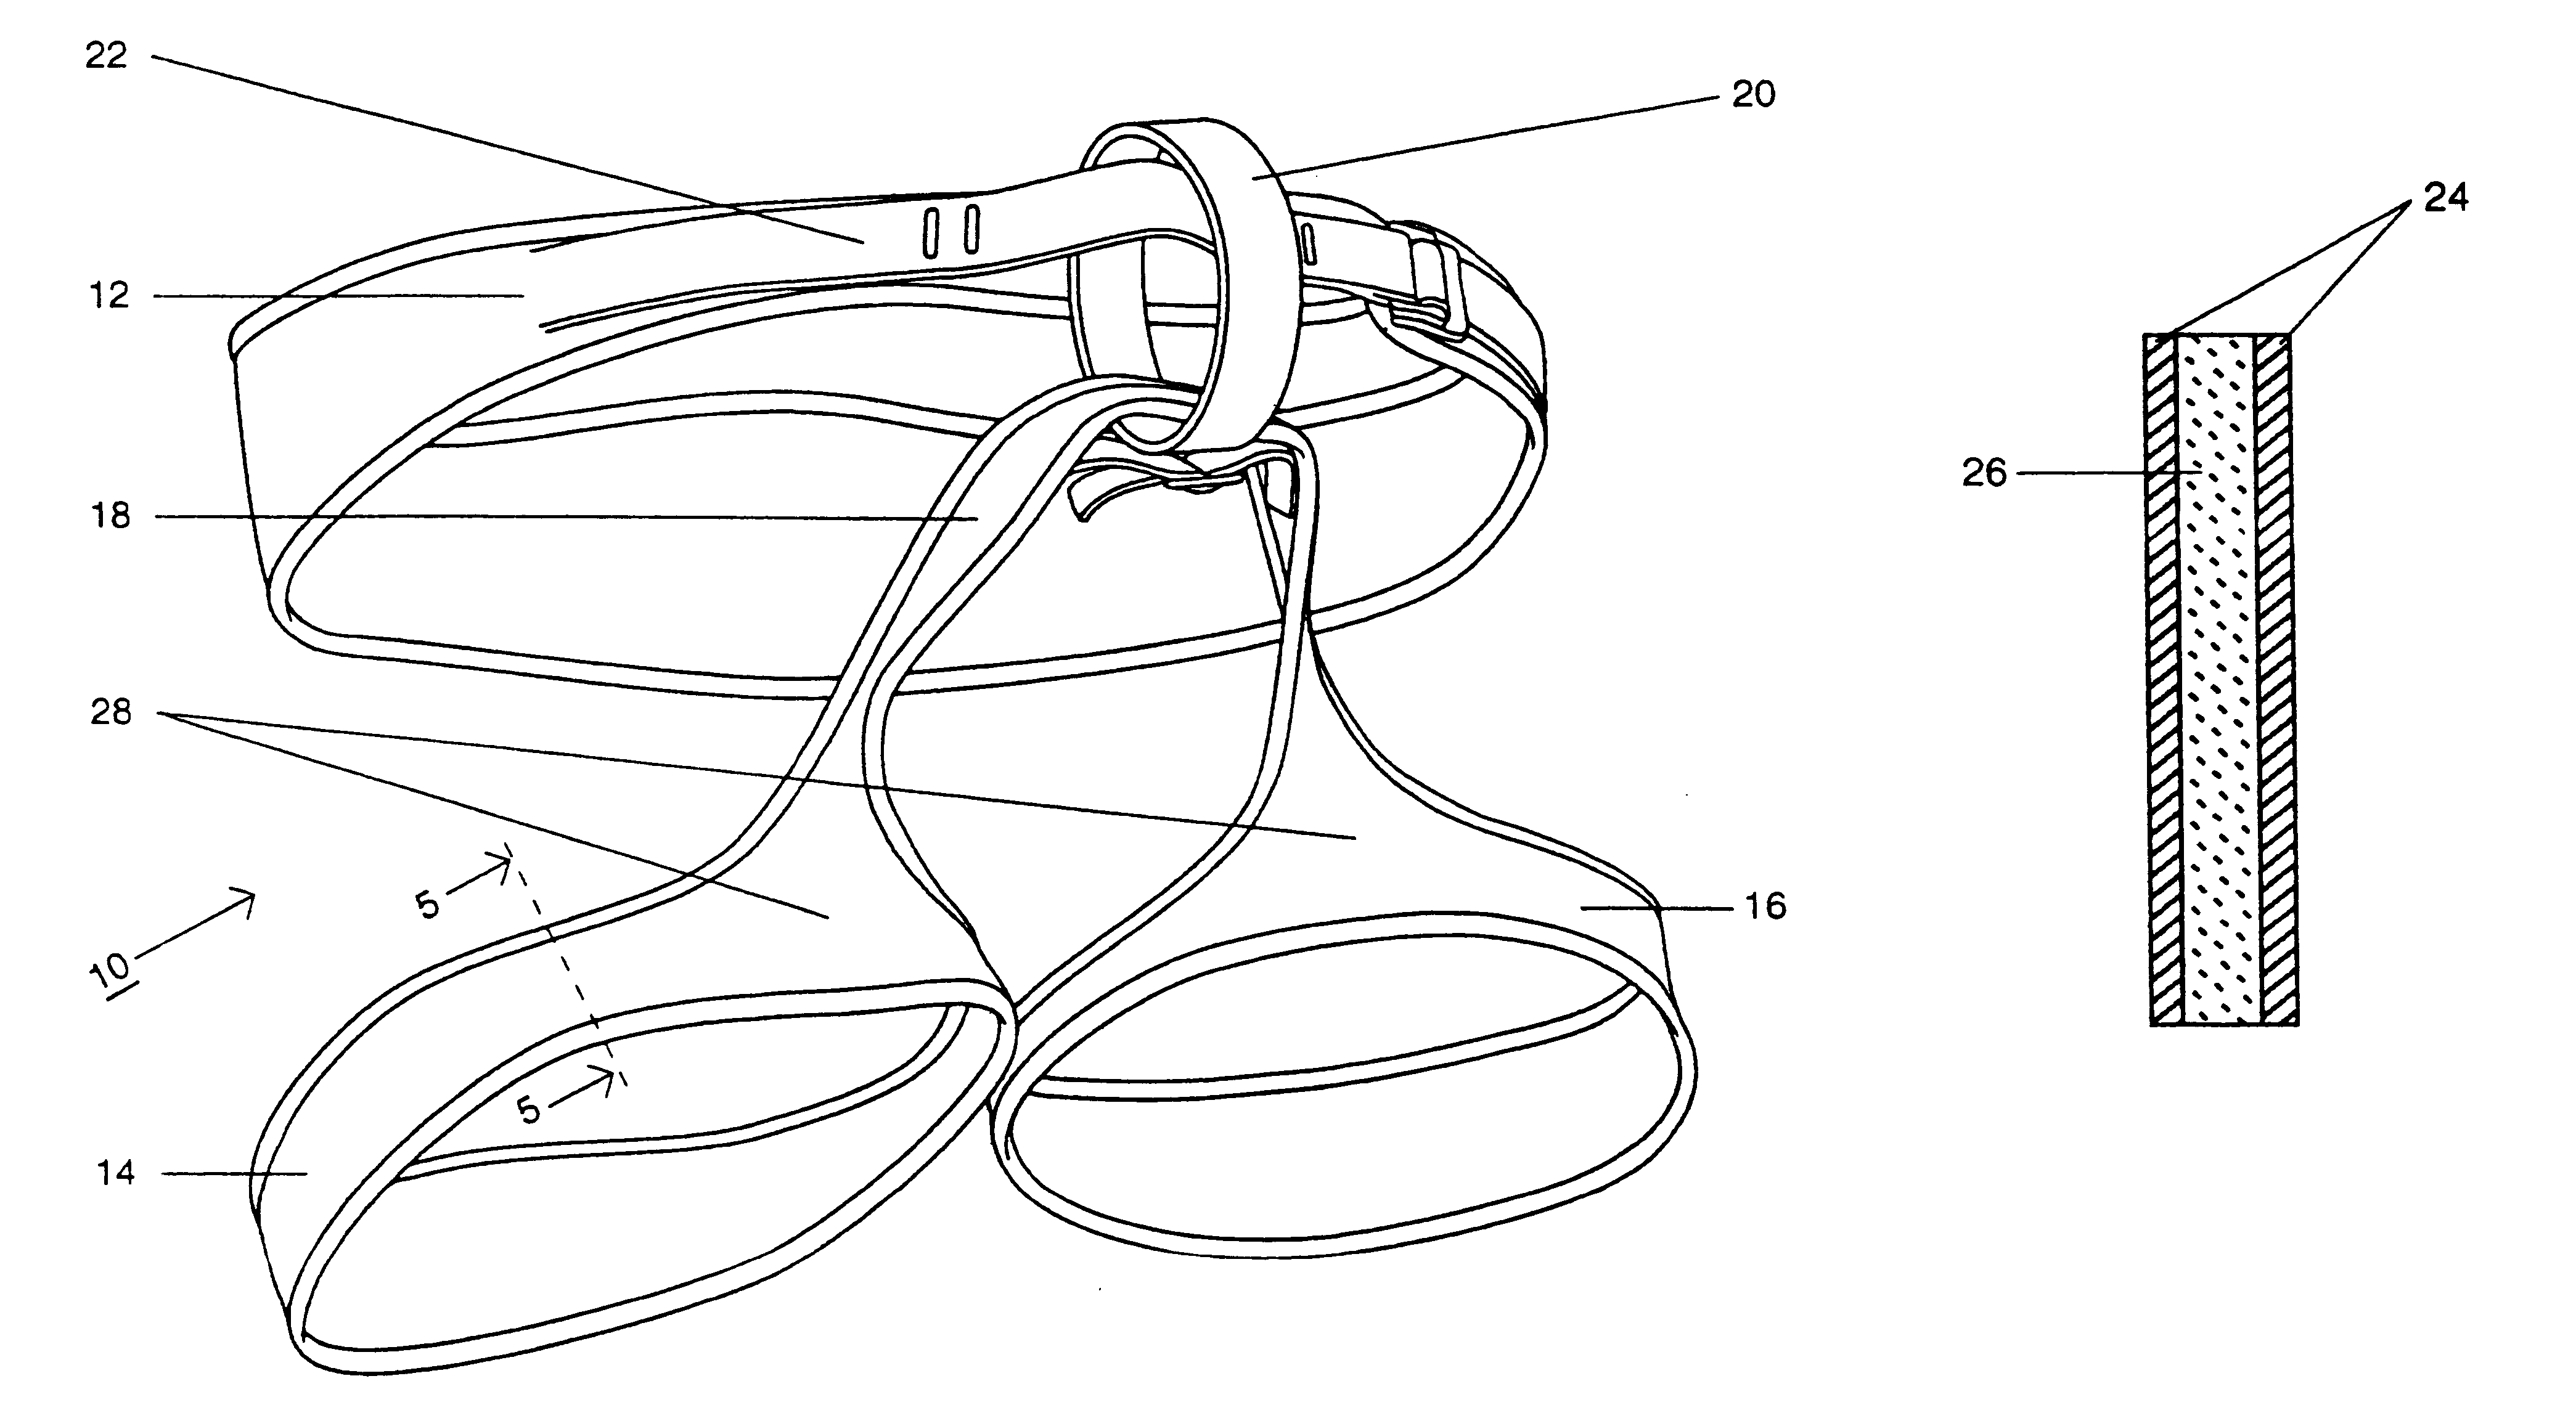 Roping sit harness with force distributor